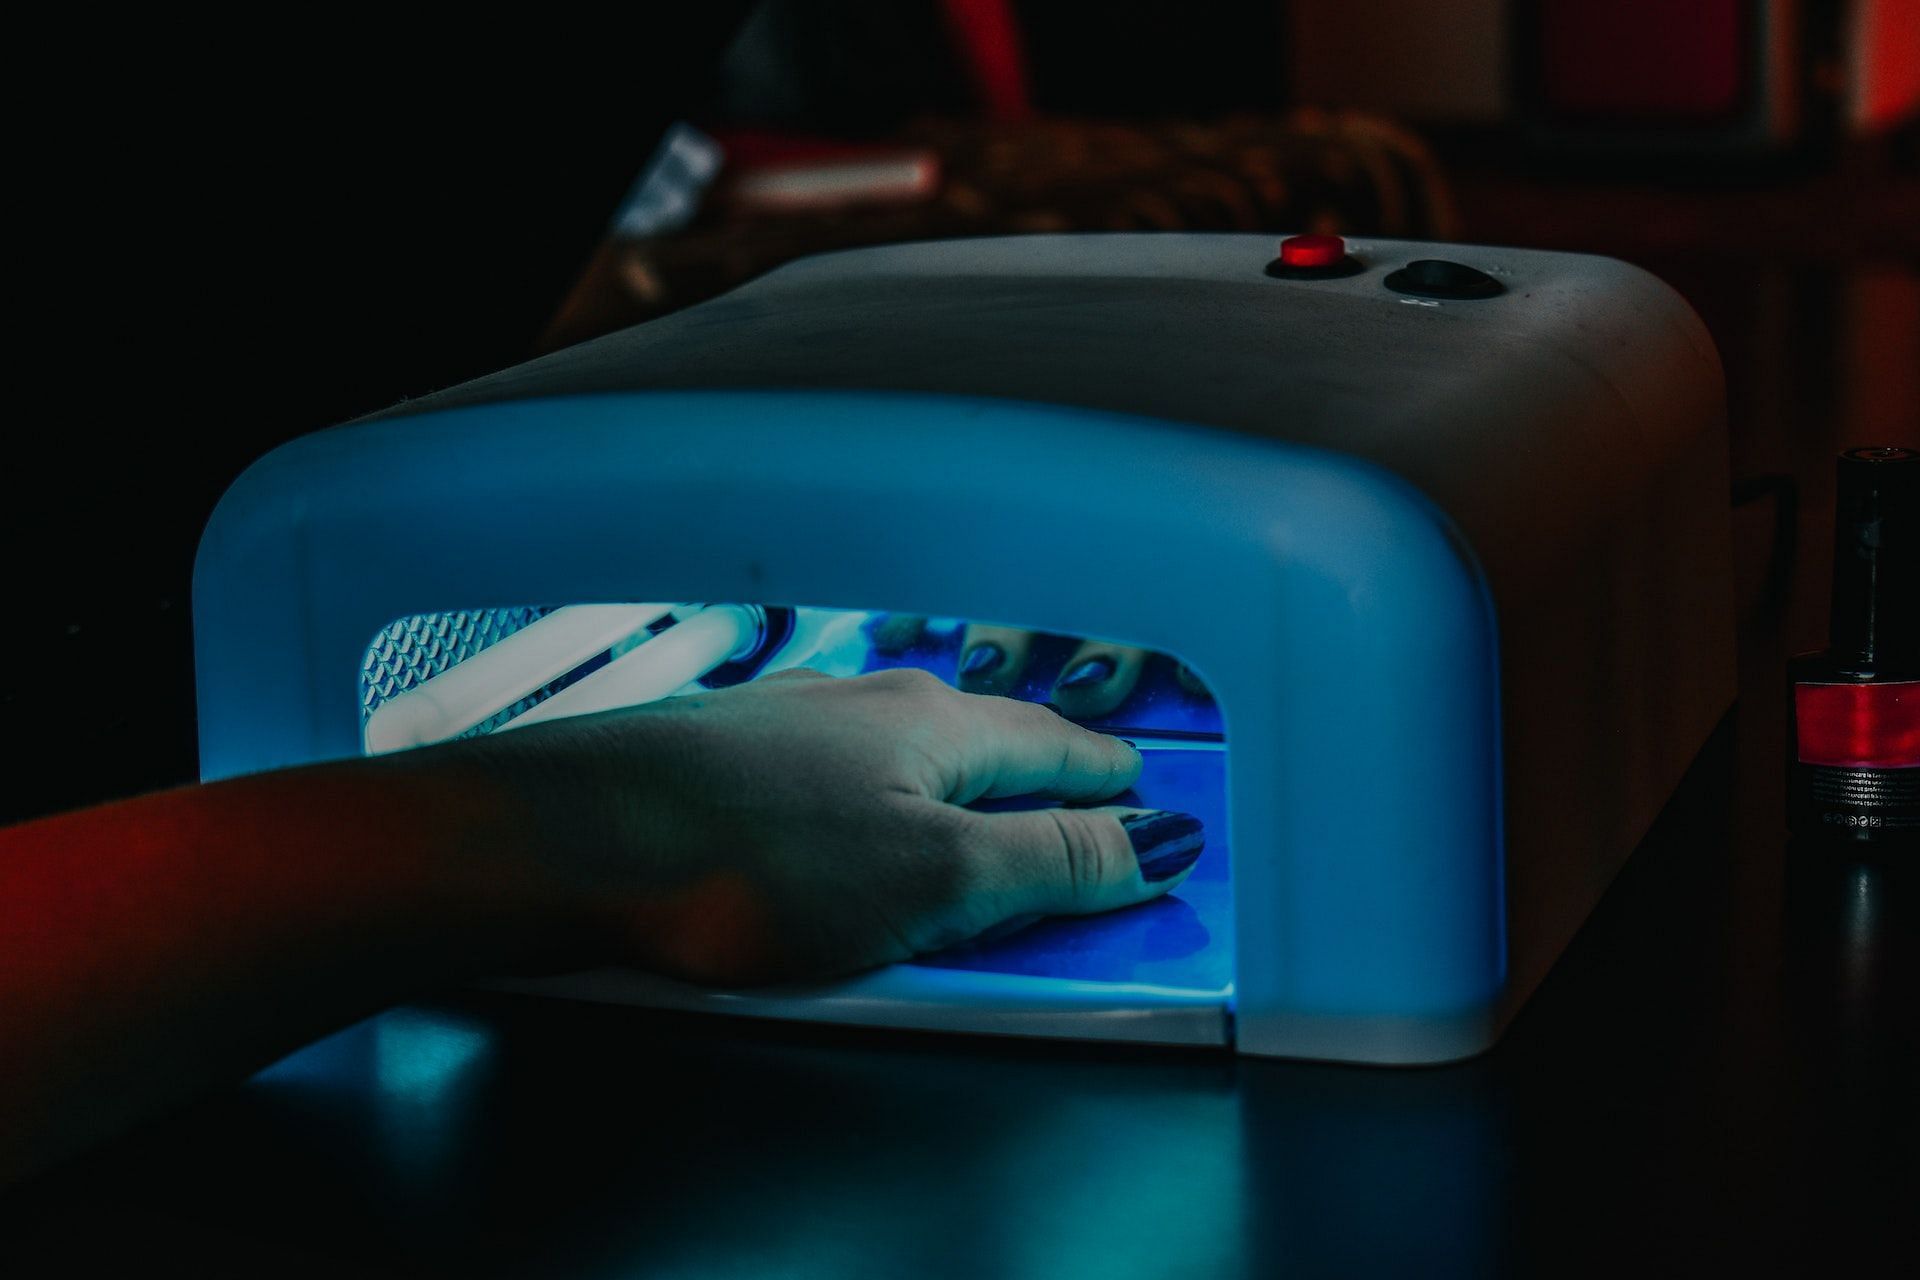 UV nail lamp can damage your DNA. (Photo via Pexels/Dids)